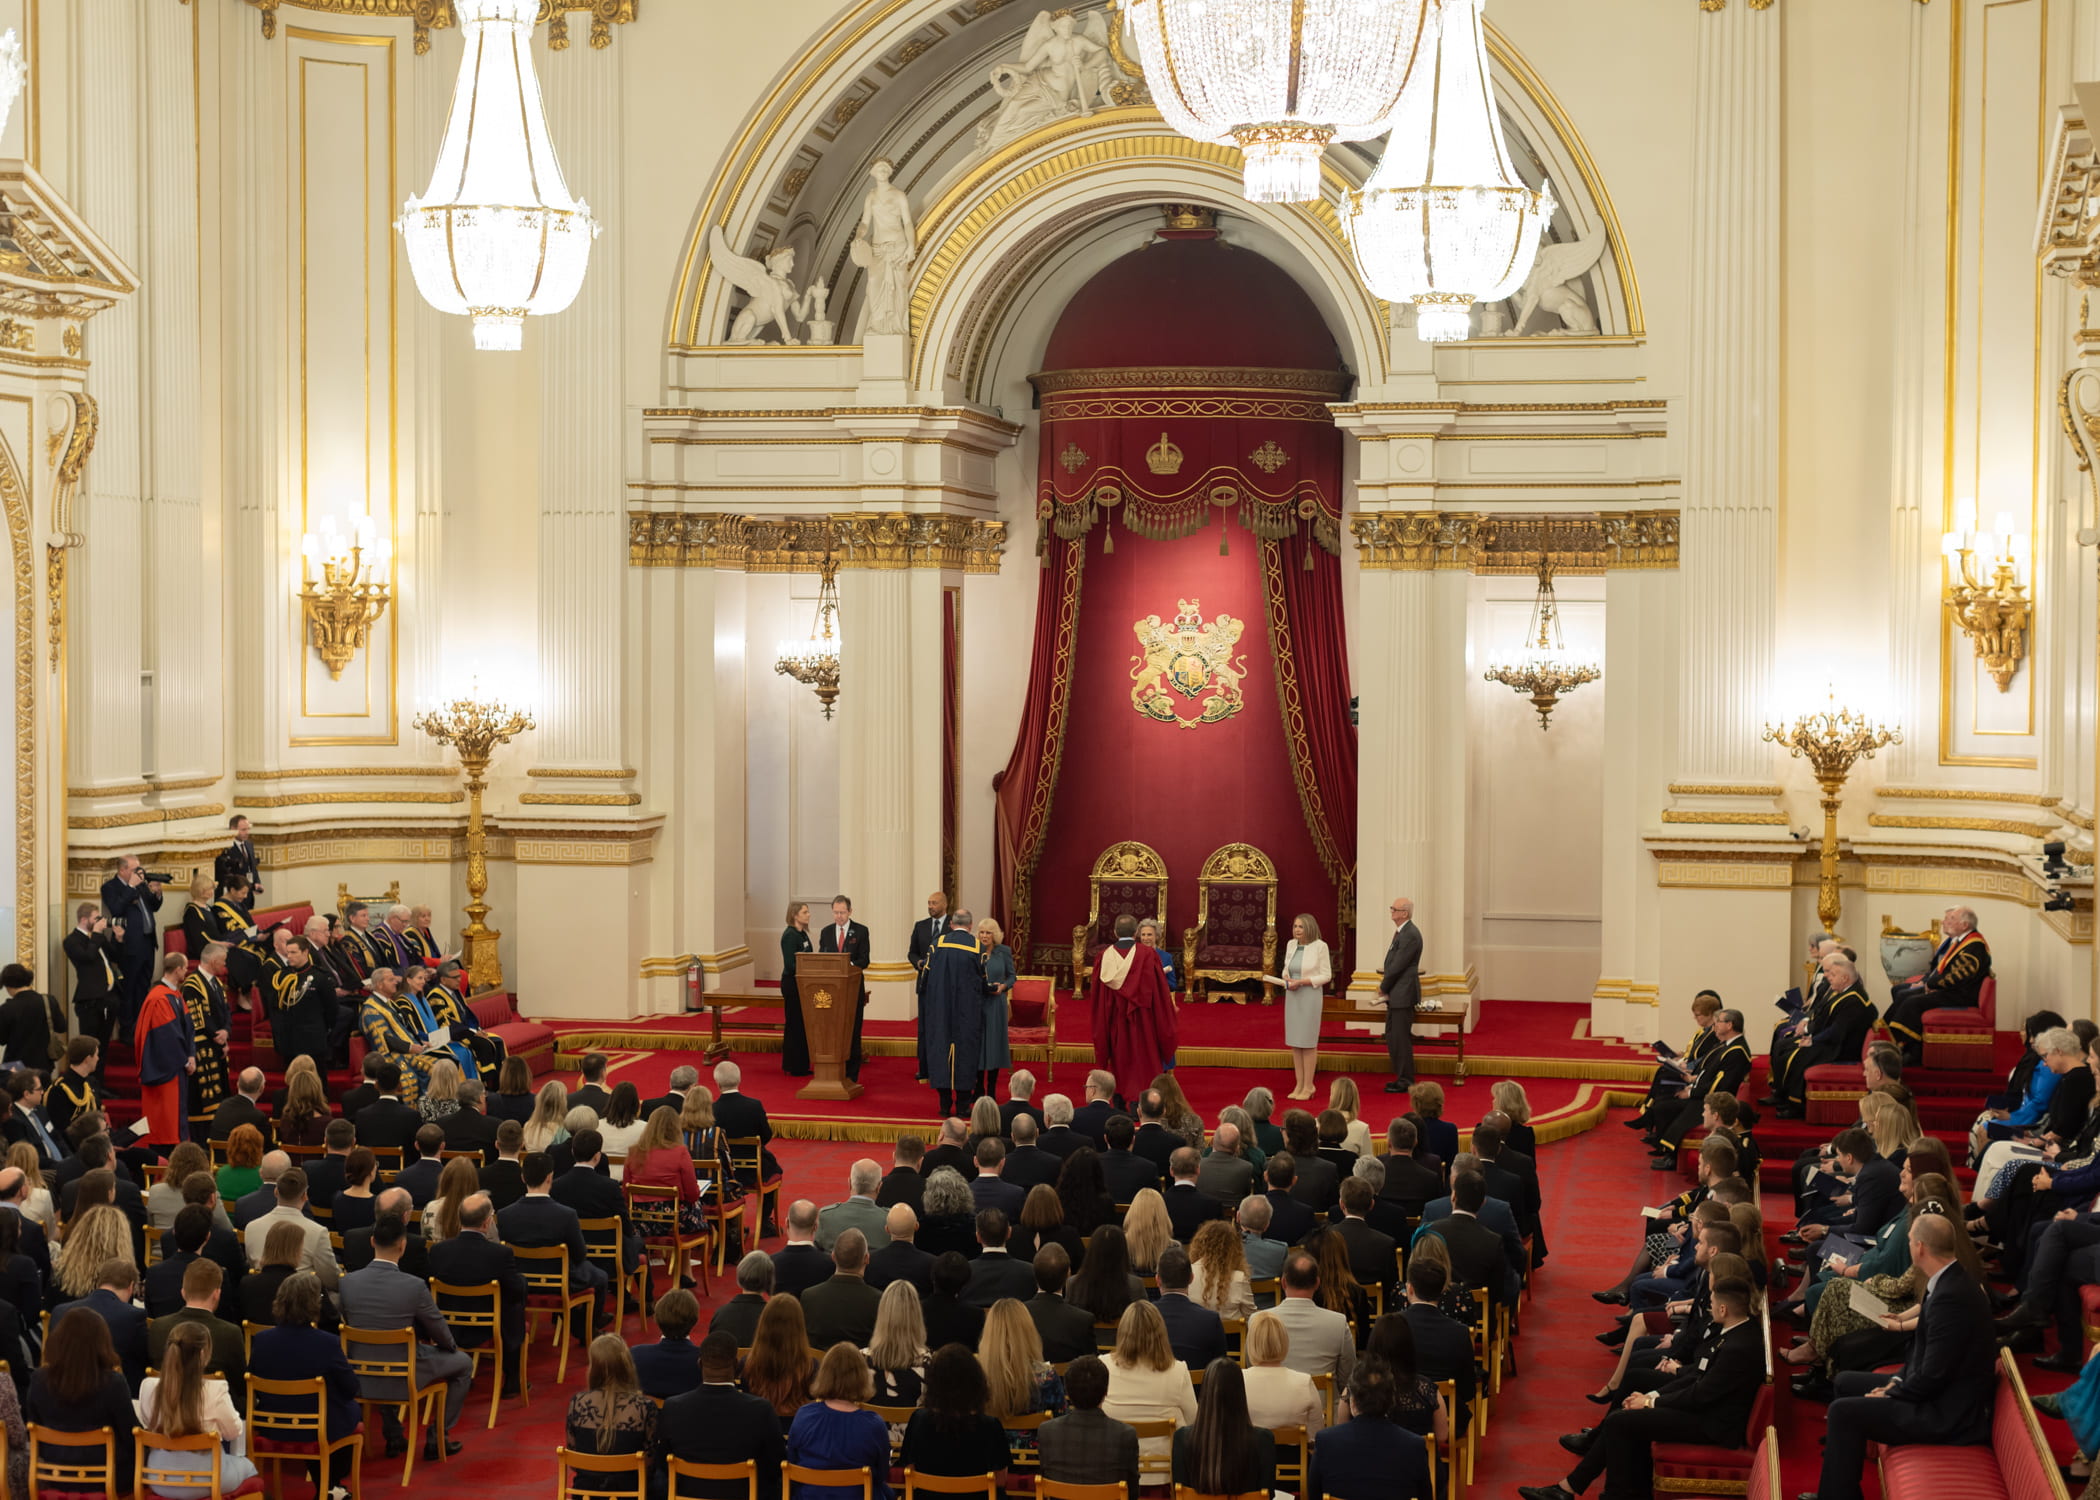 University of Lincoln, UK, Awarded Highest Honour by the Queen at Buckingham Palace